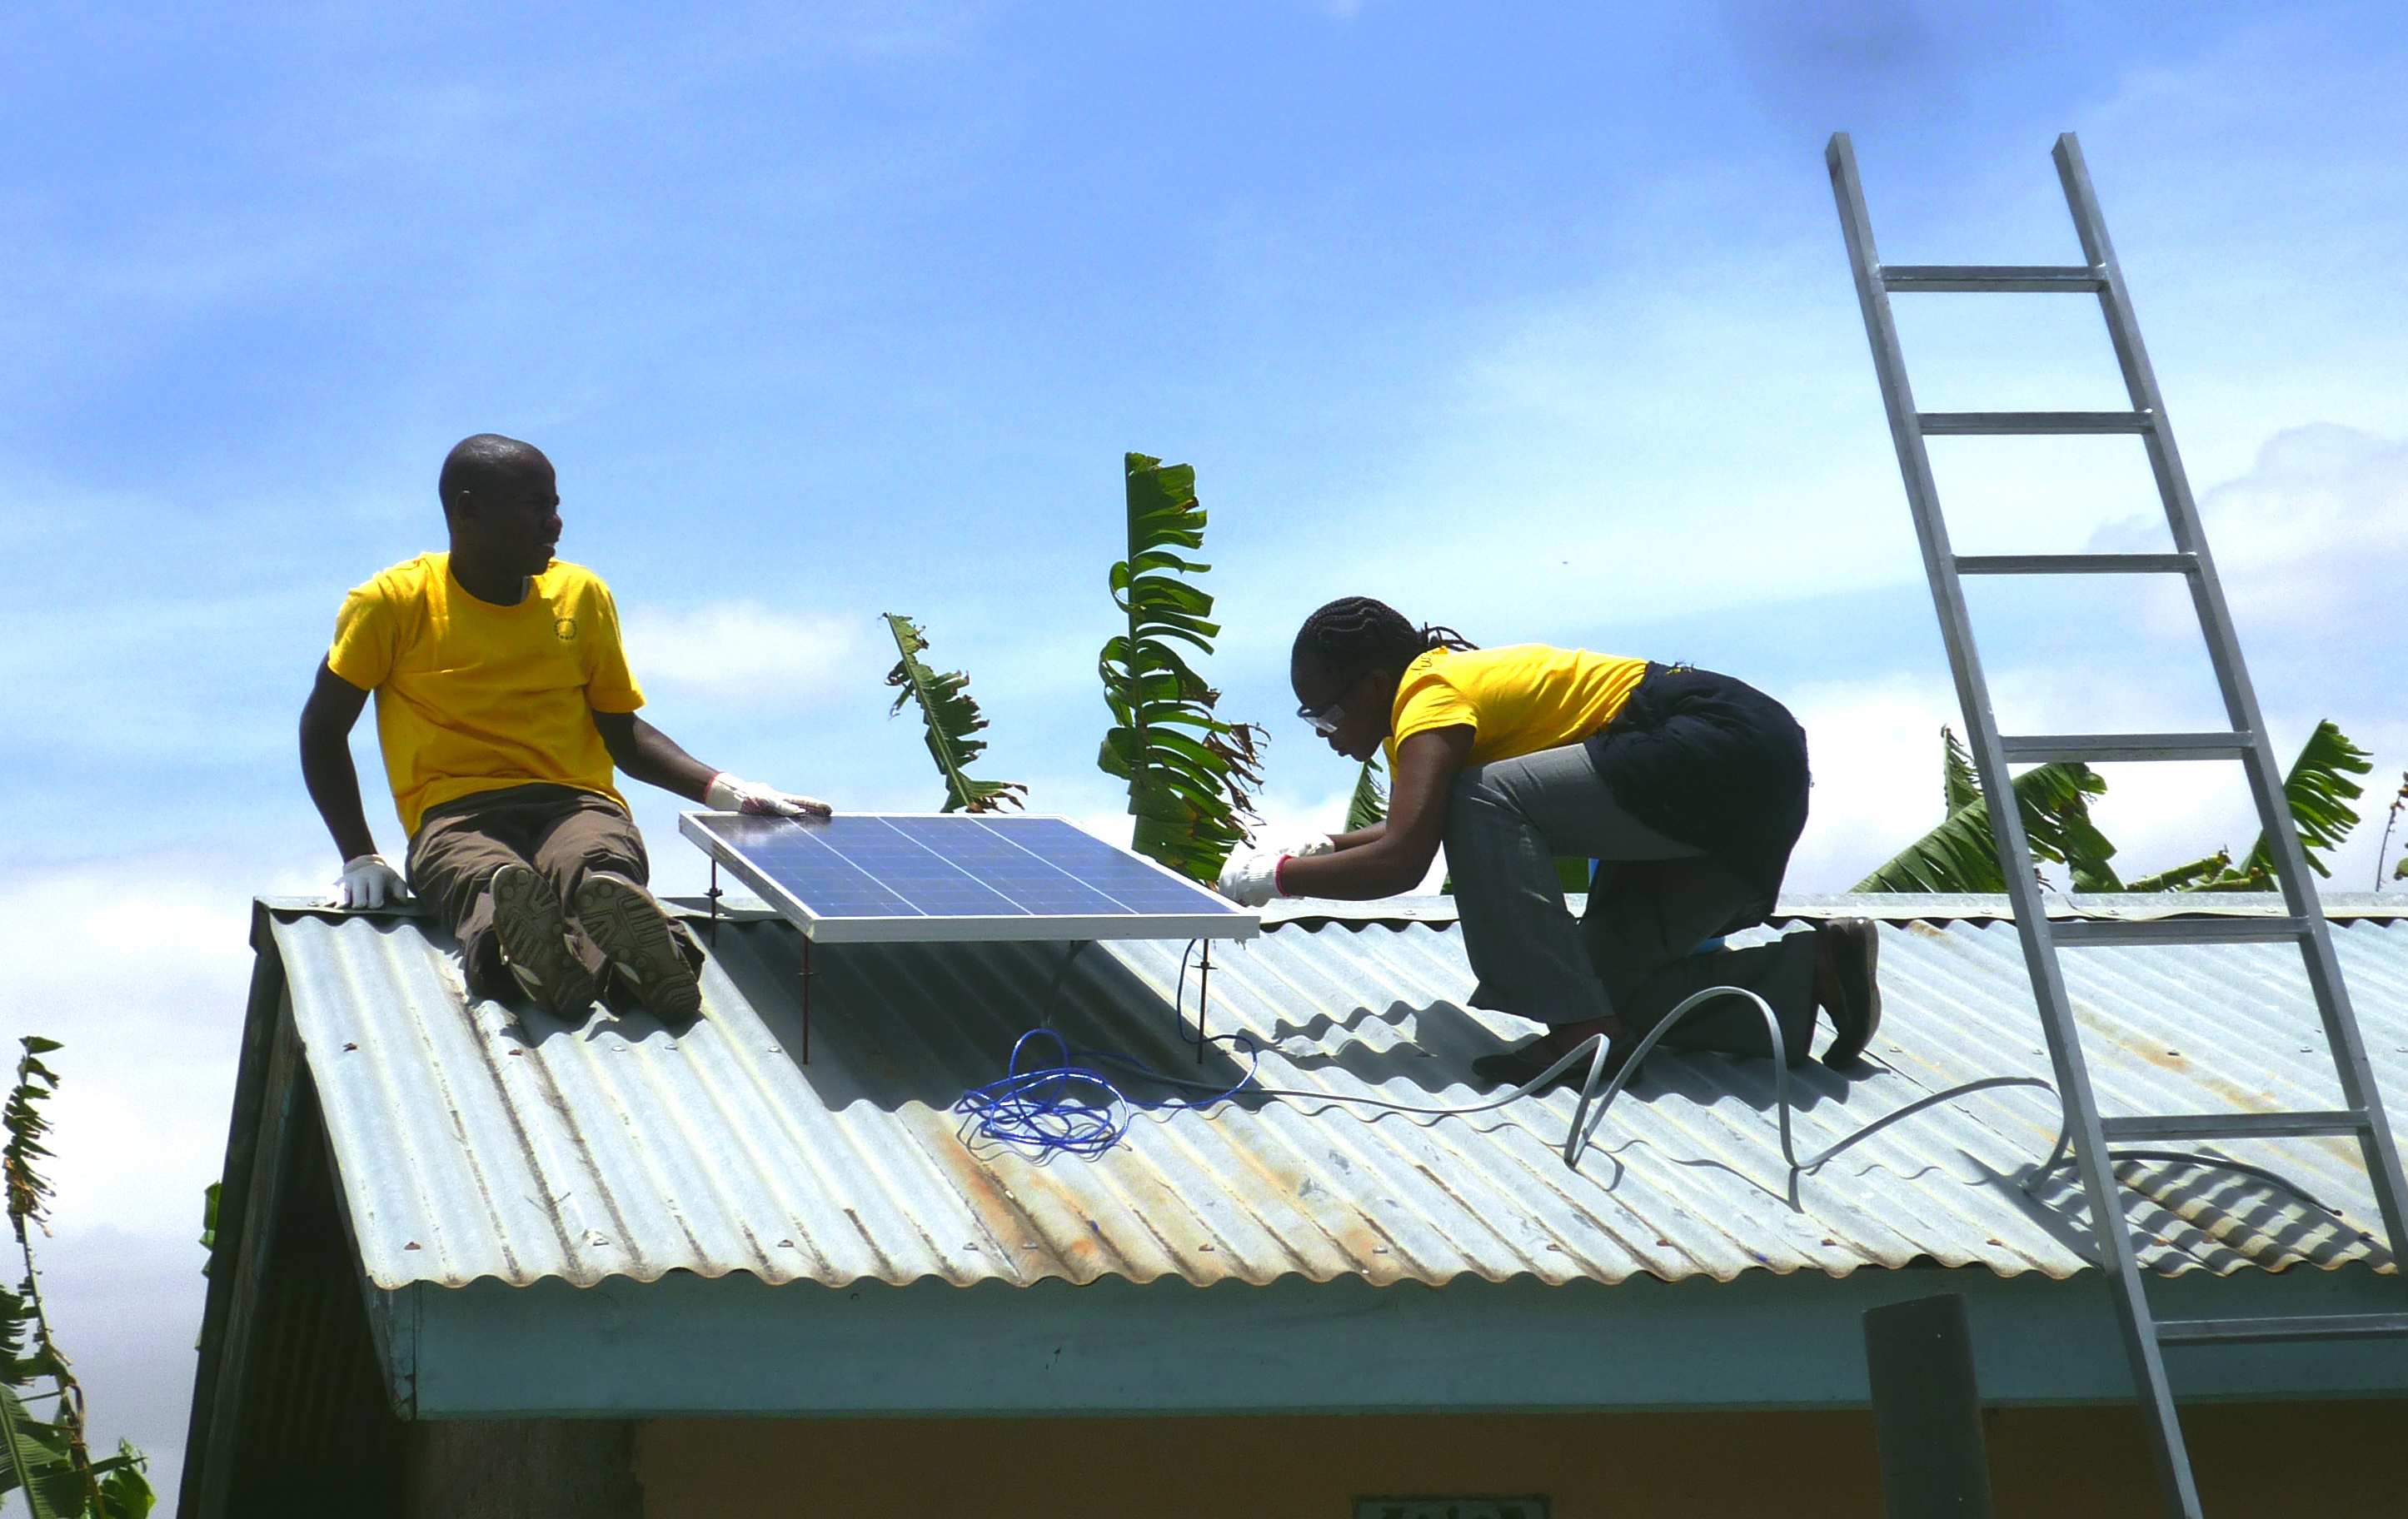 Mobisol workers on a roof in Tanzania